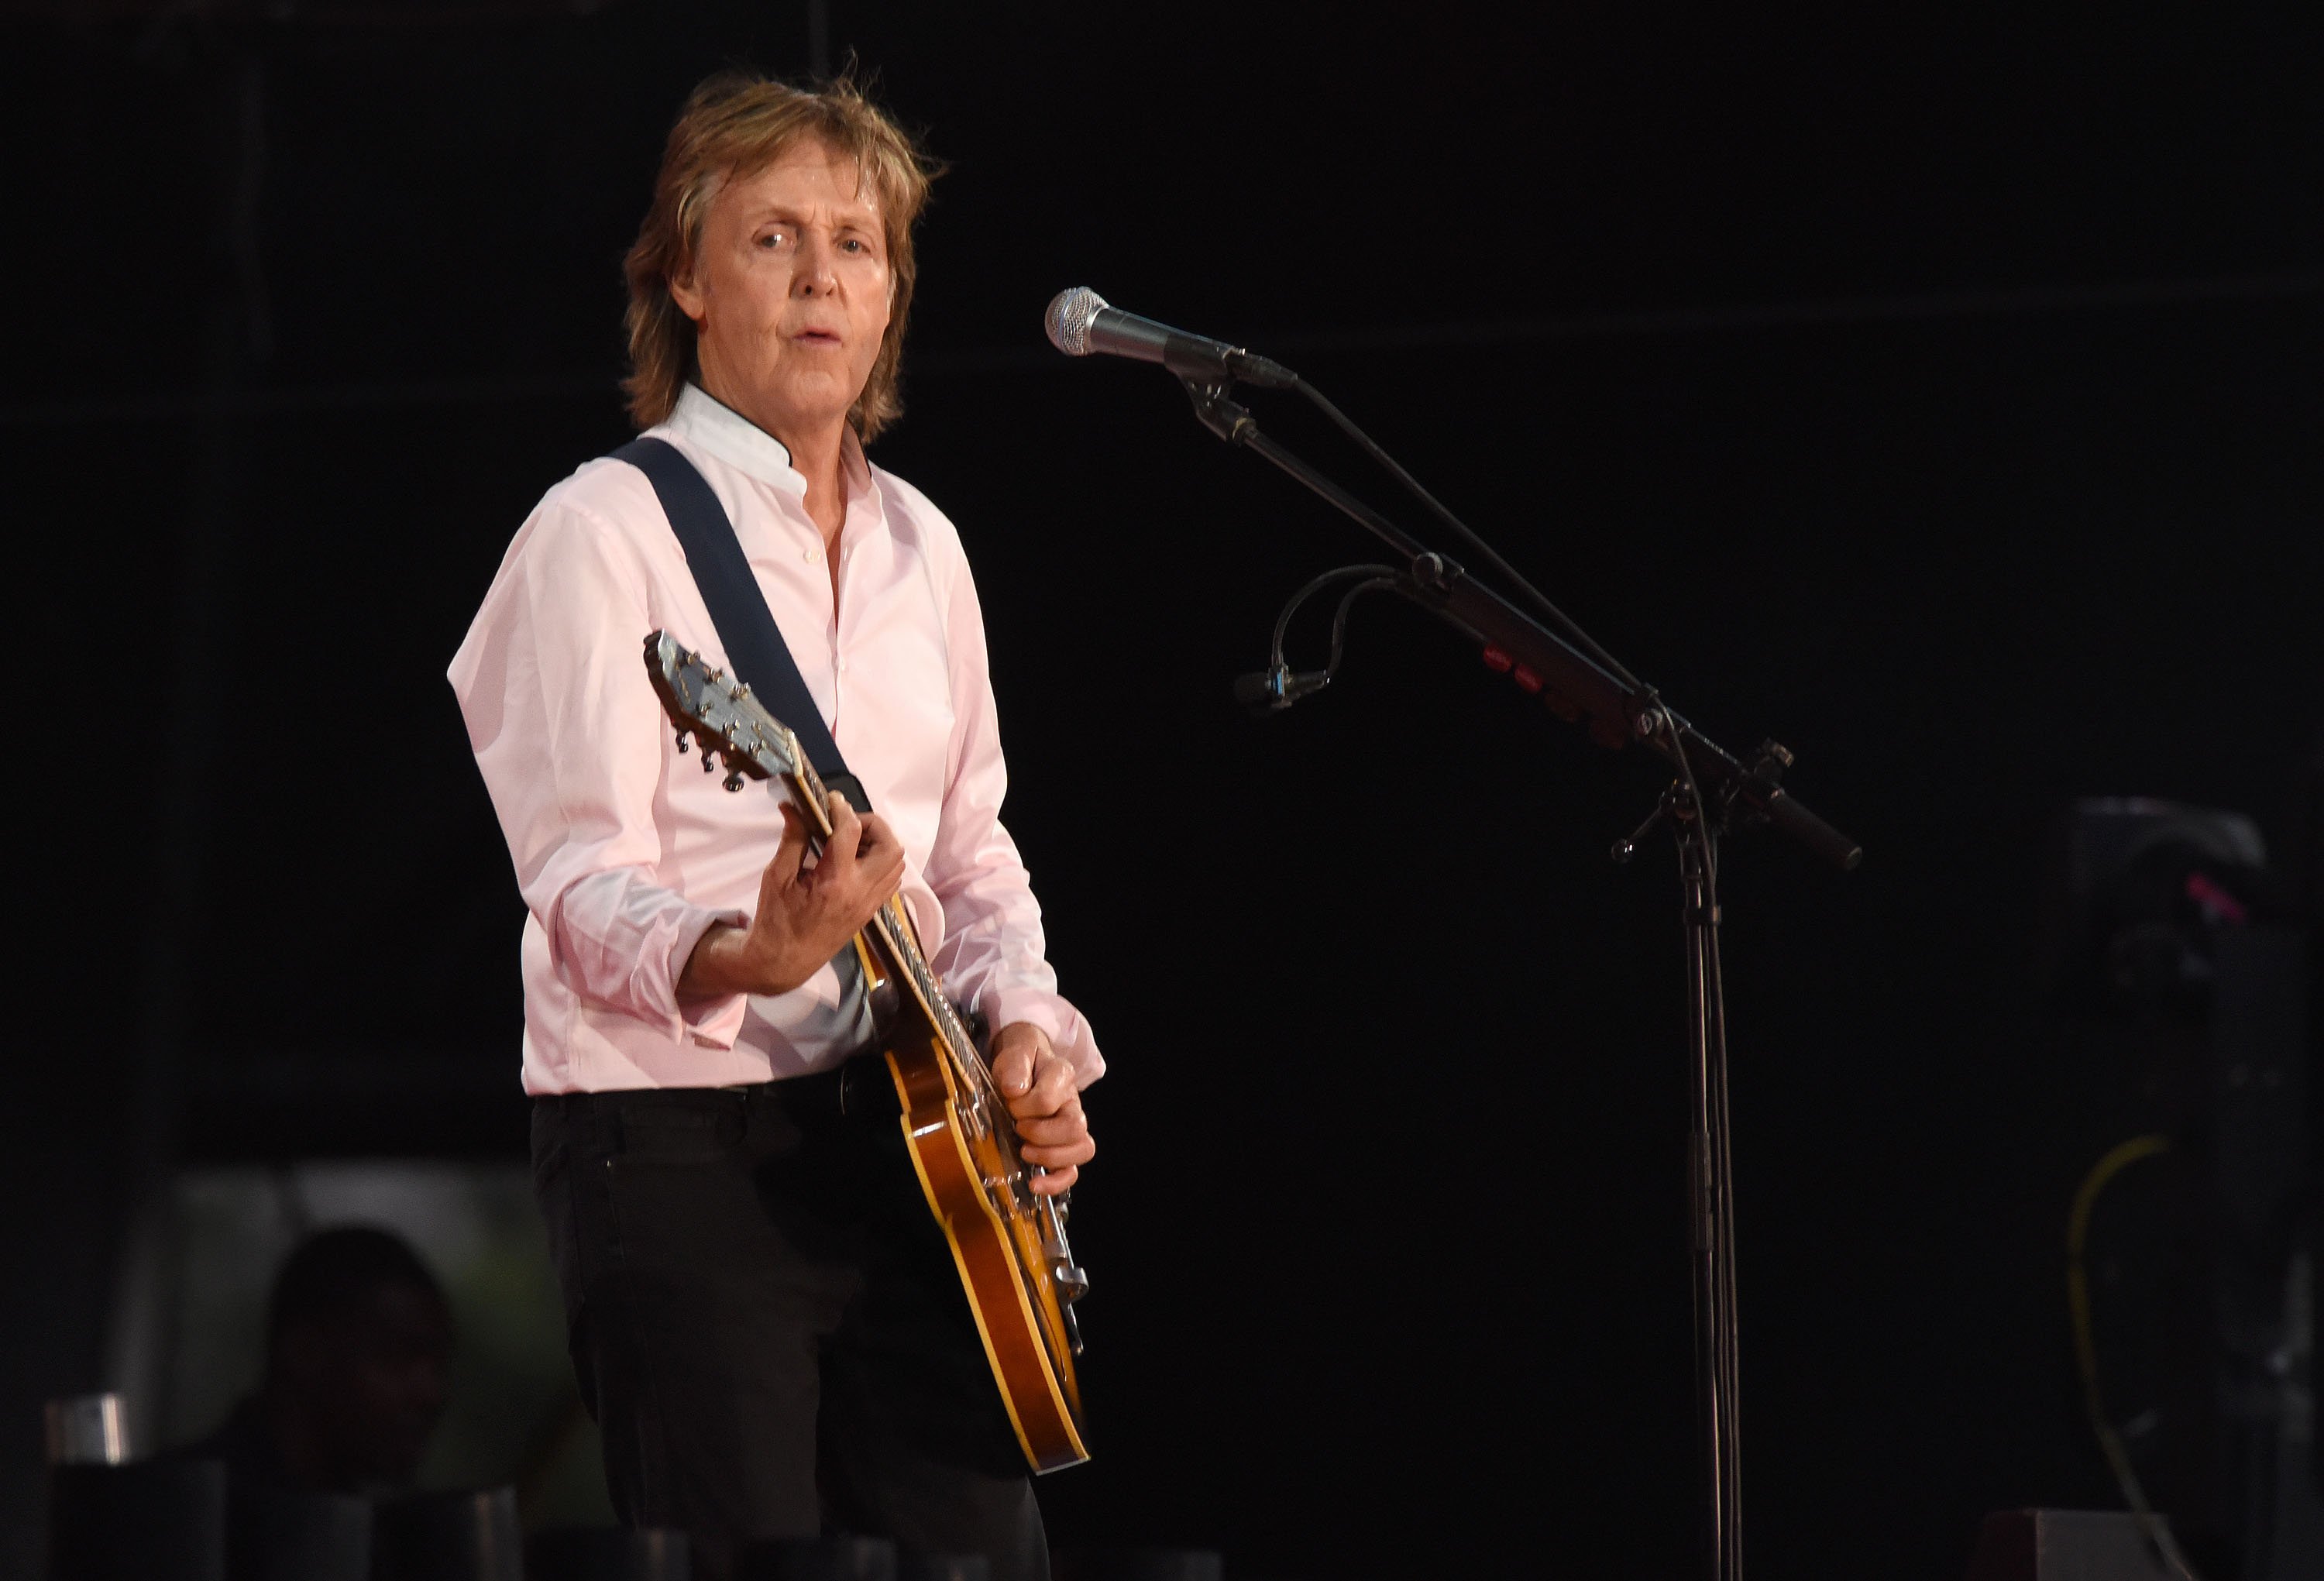 Paul McCartney performs at Lollapalooza in Chicago, Illinois